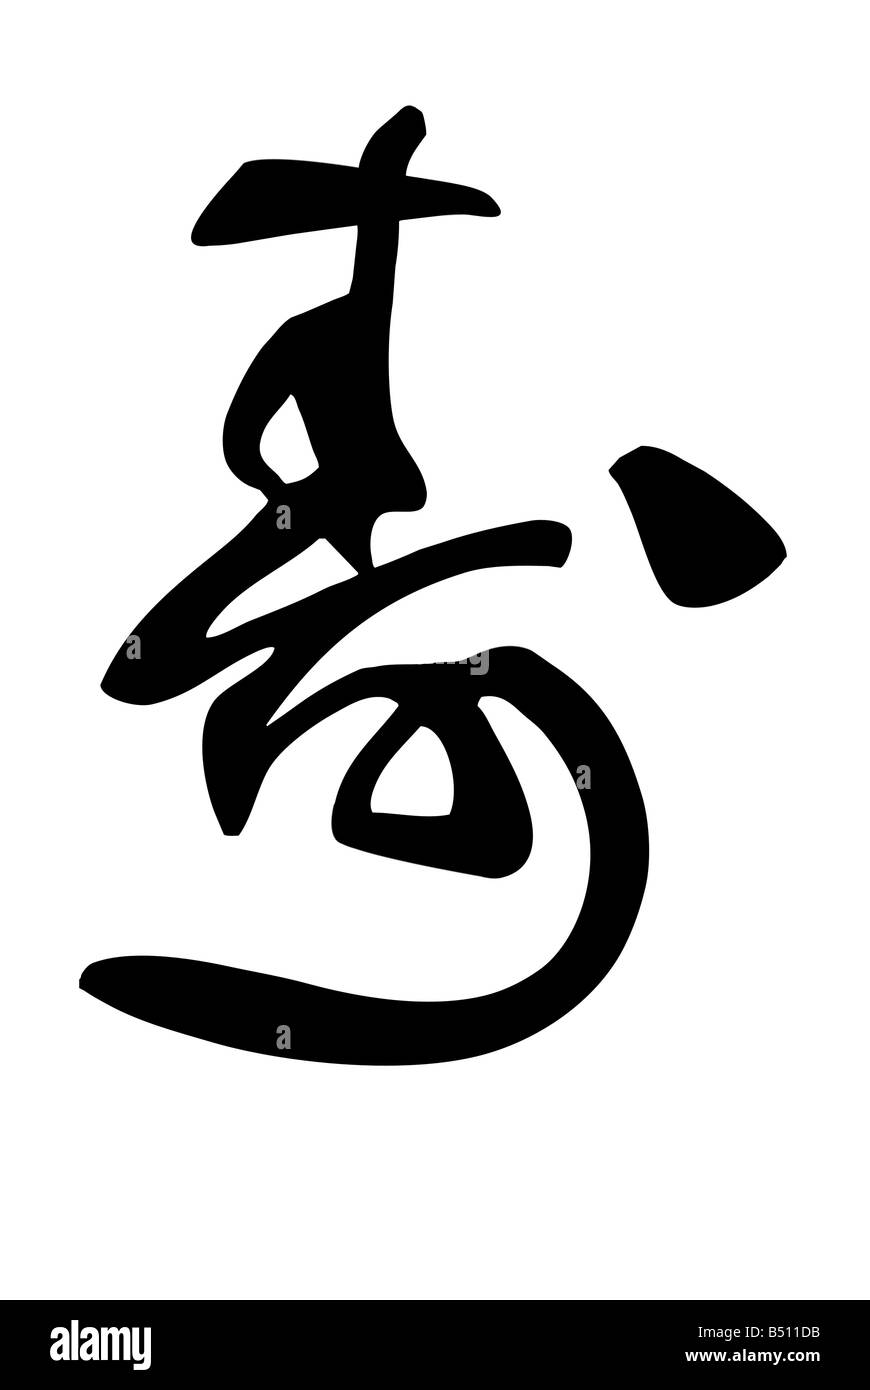 Calligraphie chinoise pour life-span Banque D'Images